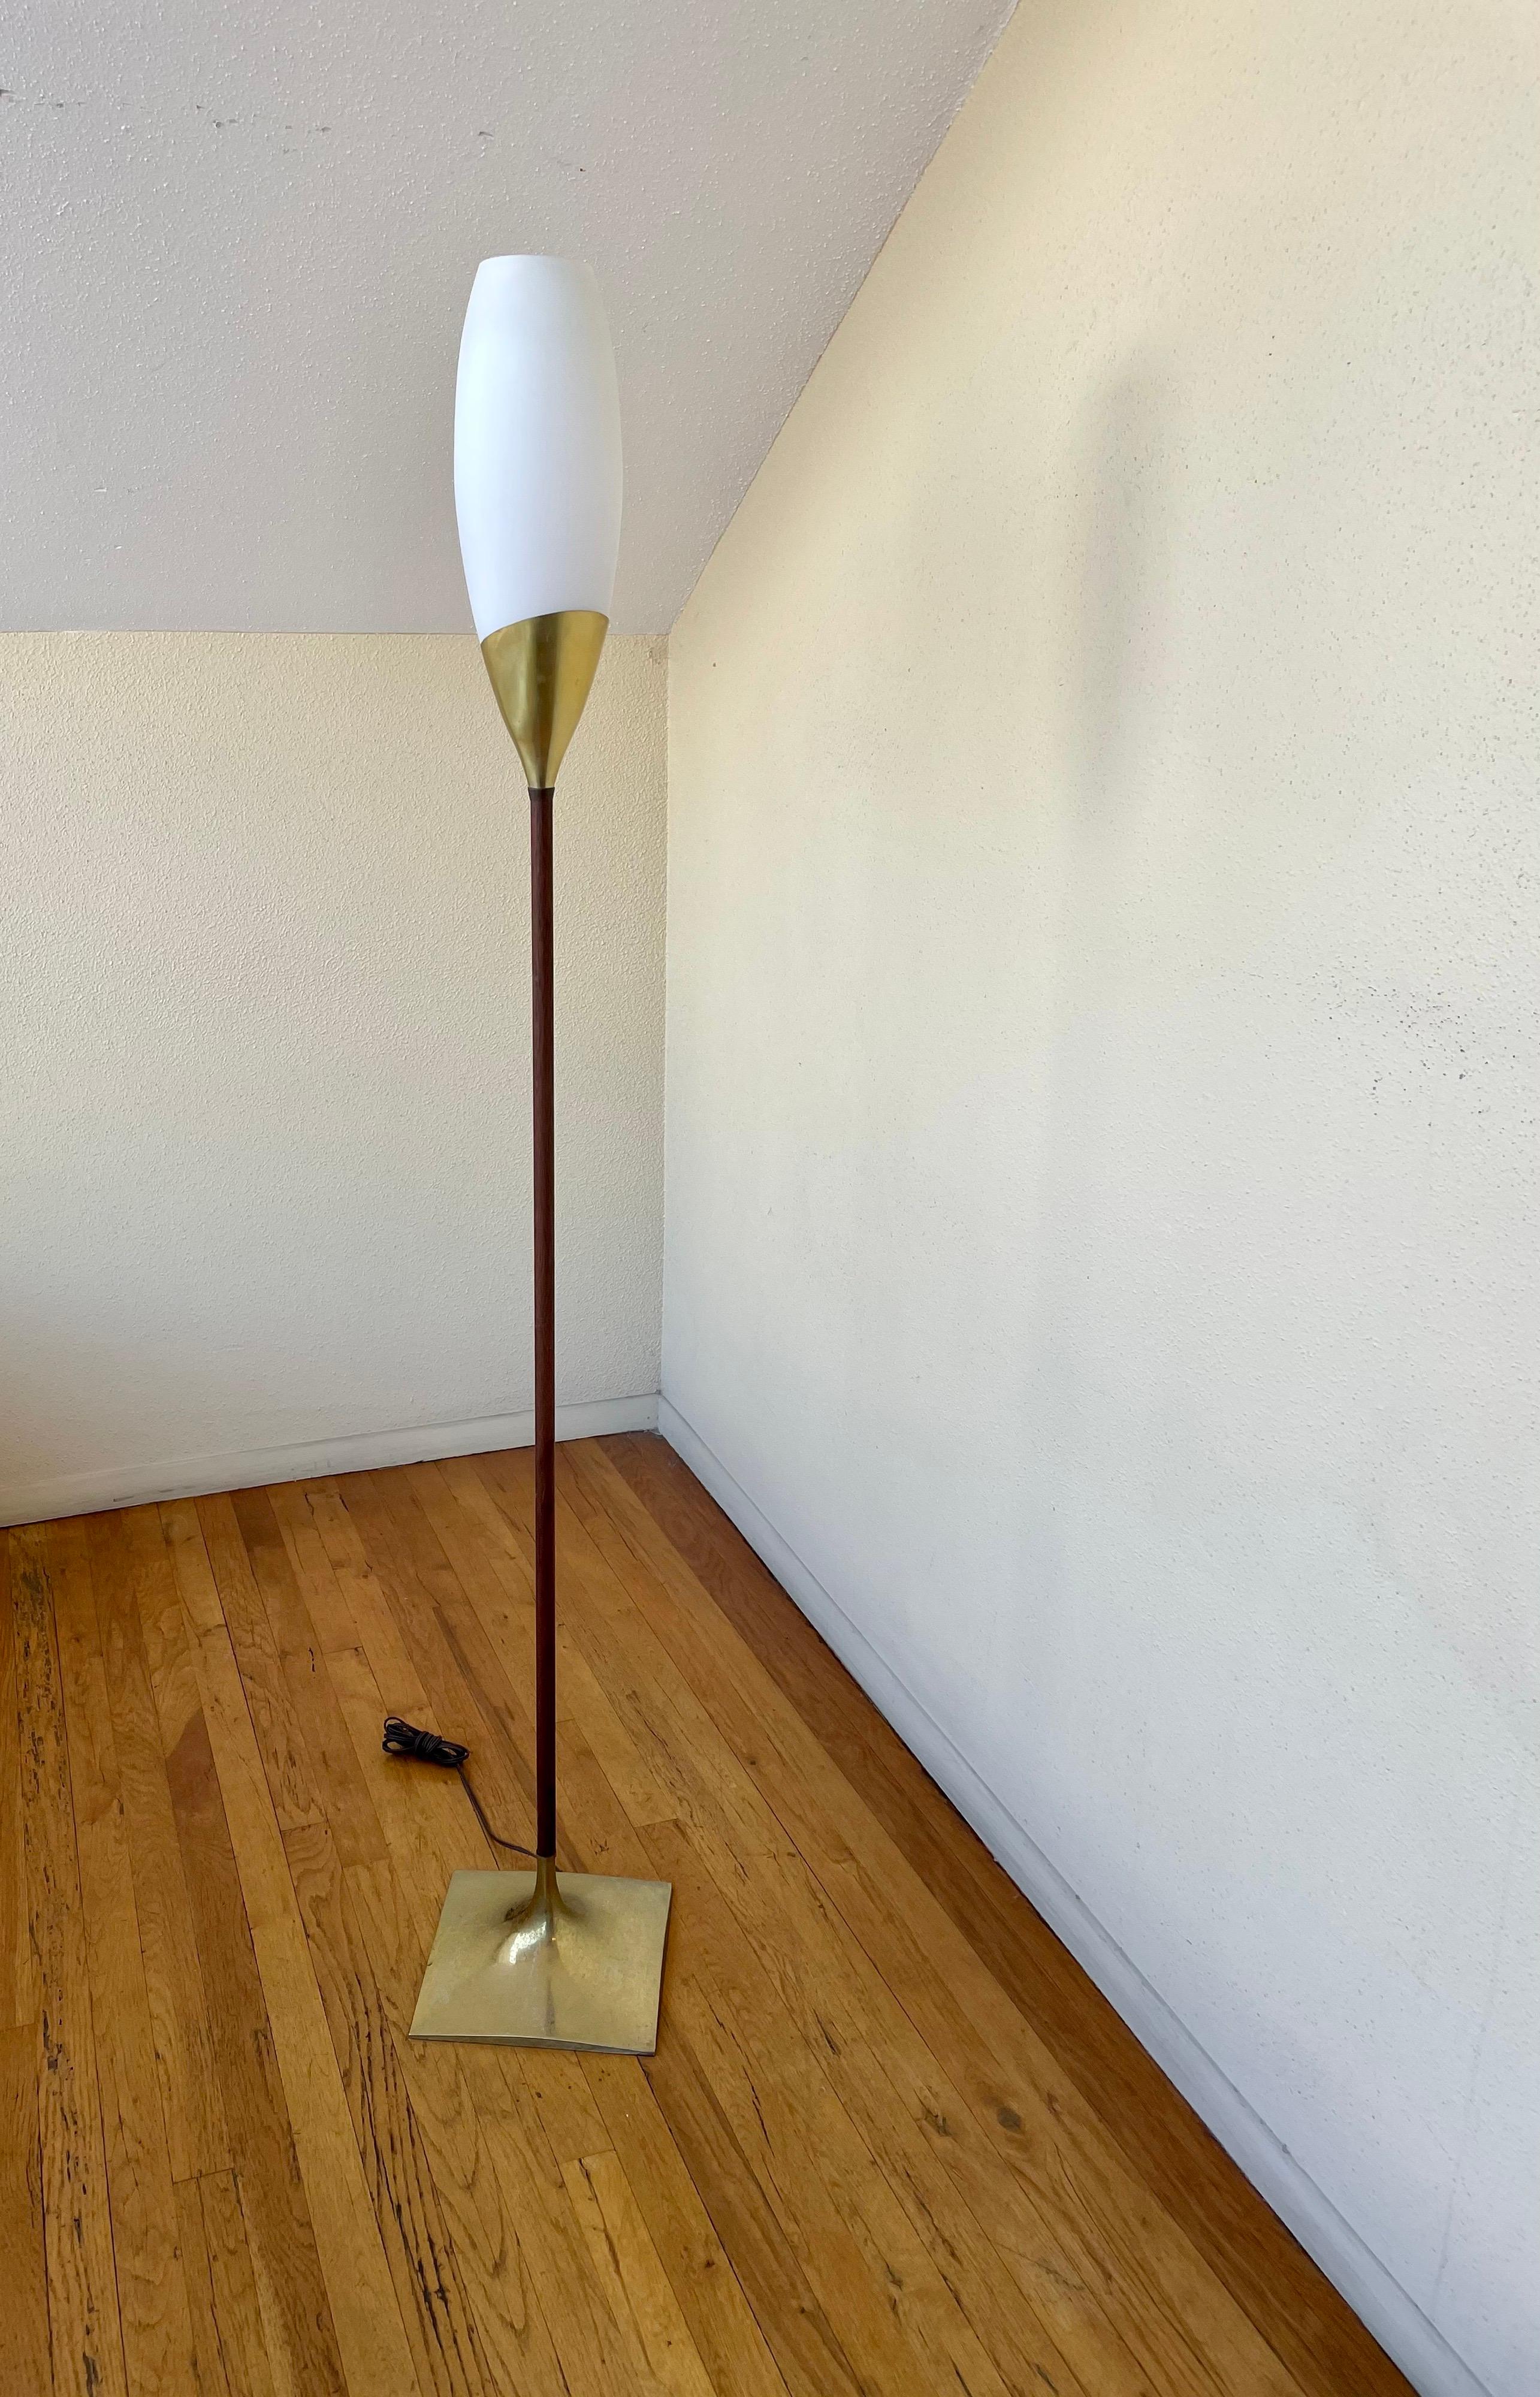 Mid-Century Modern floor lamp with tulip frosted Italian glass shade, circa the 1960s. This piece features a unique walnut stem and a sculptural brass finished base. Equipped with a three-way switch.